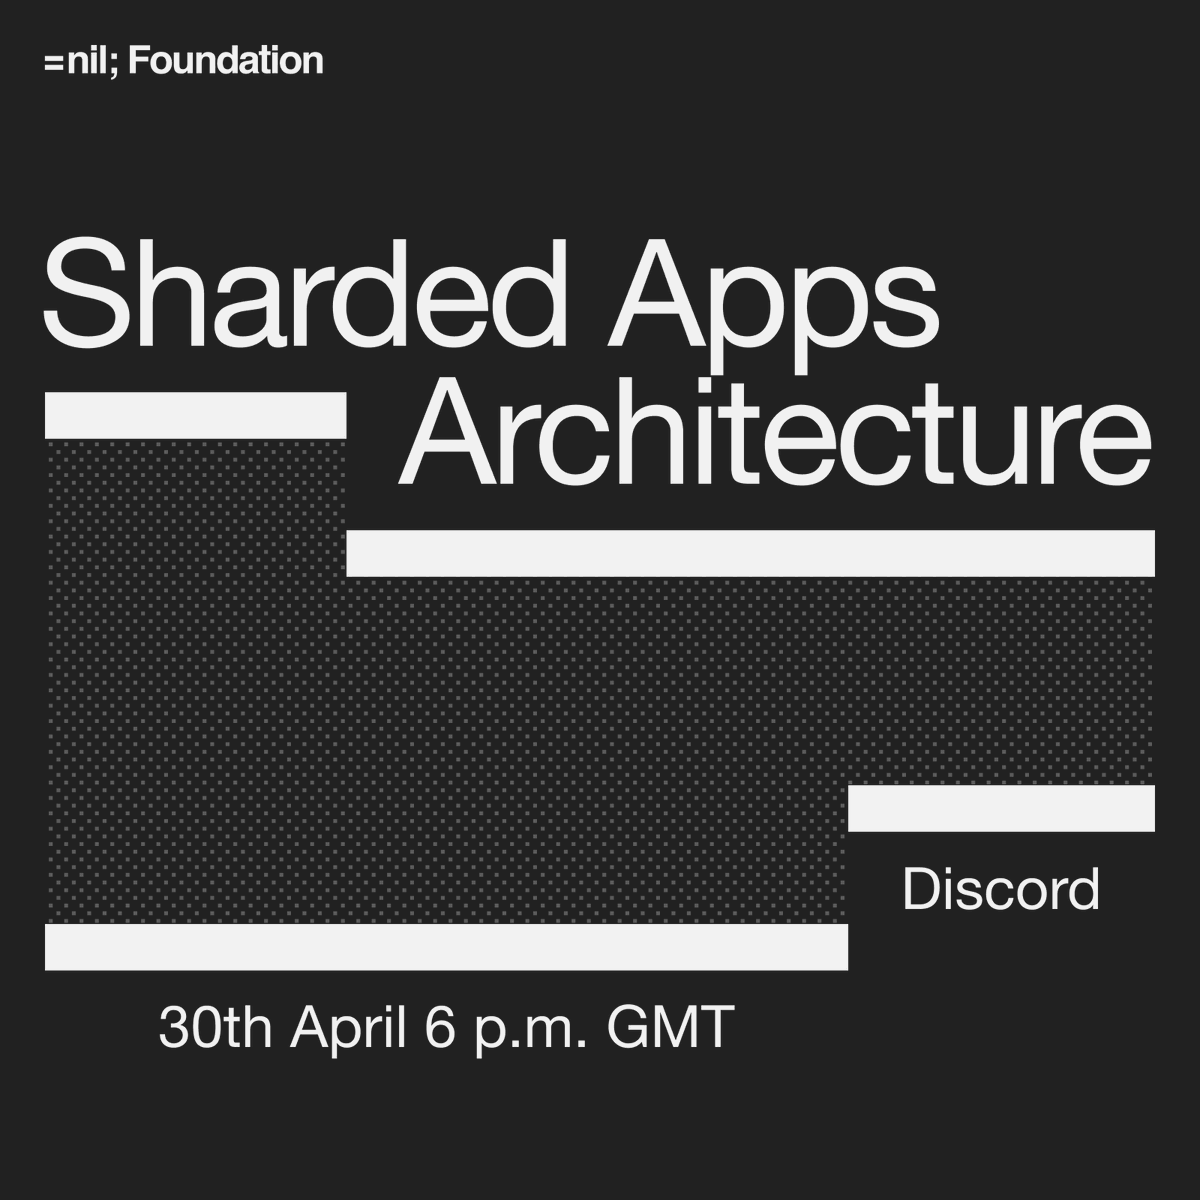 RSVP to join our Discord Event 'Sharded Apps Architecture' on Mon, Apr 30, 6PM UTC. Featuring Ilya Marozau, Senior Decentralised Engineer, from =nil; Foundation. Join us to learn how =nil; approaches sharded applications architecture in this free workshop exclusive to the =nil;